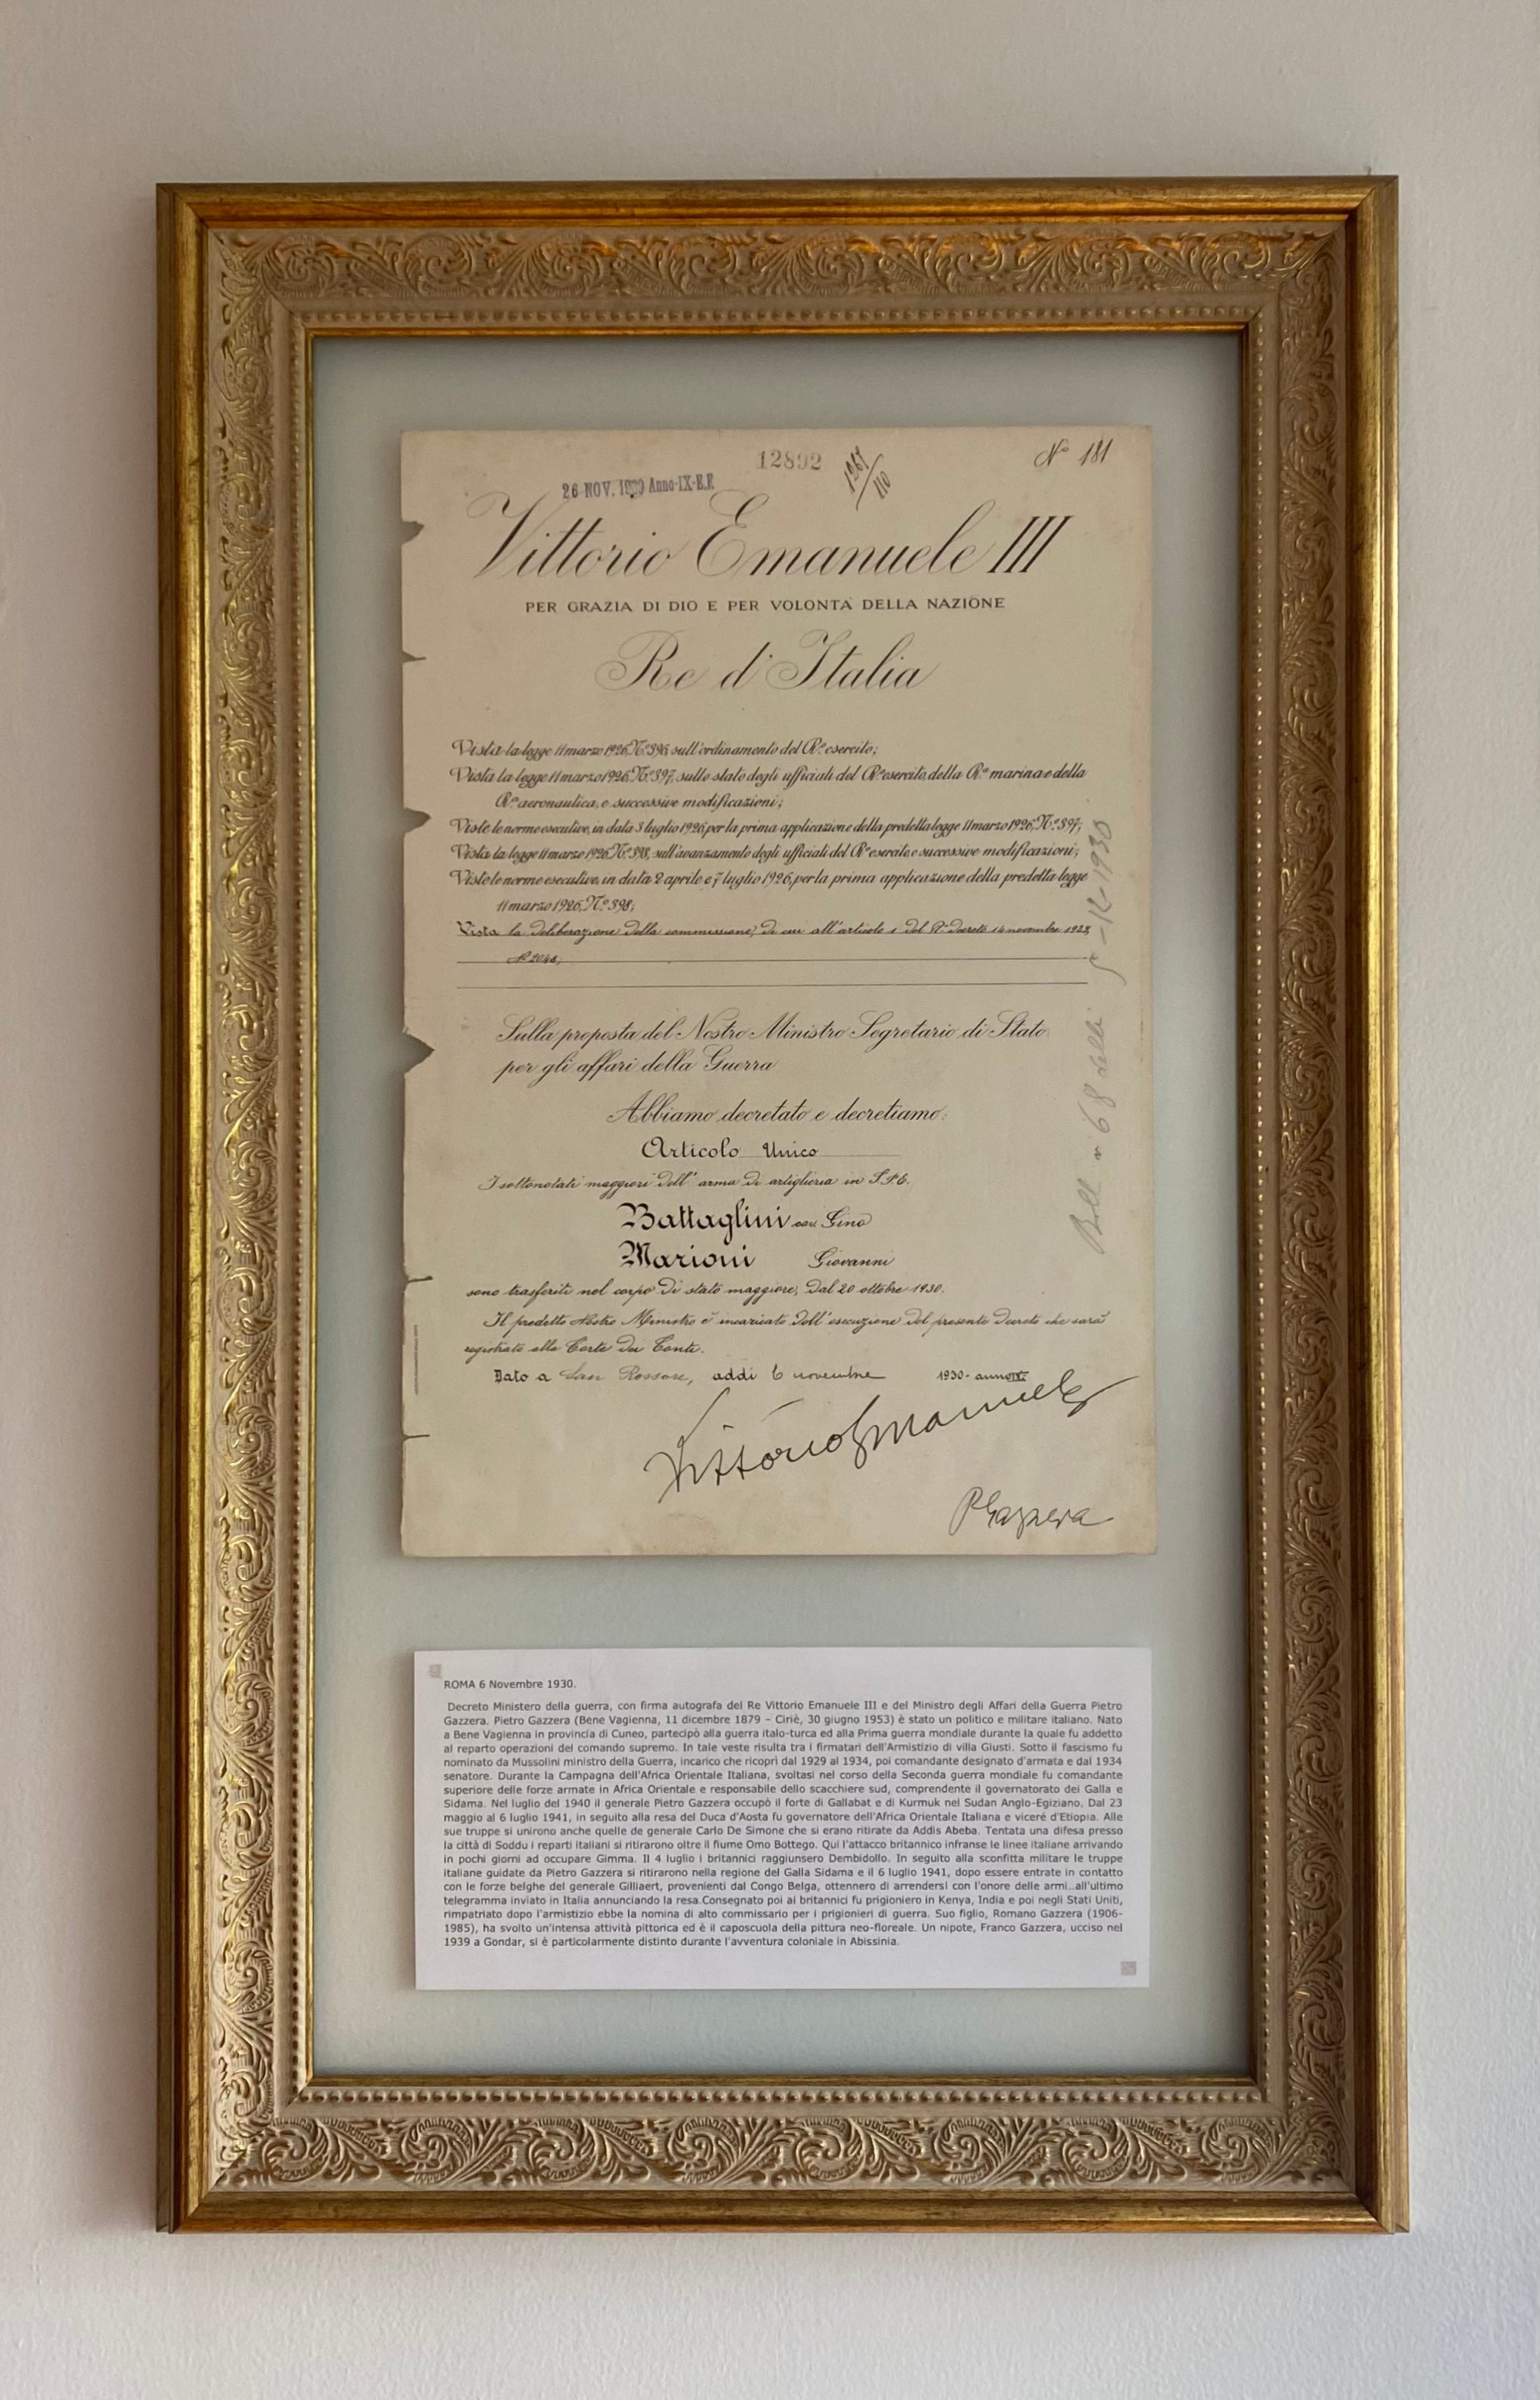 1930. Ministry of War Decree, signed by King Vittorio Emanuele III